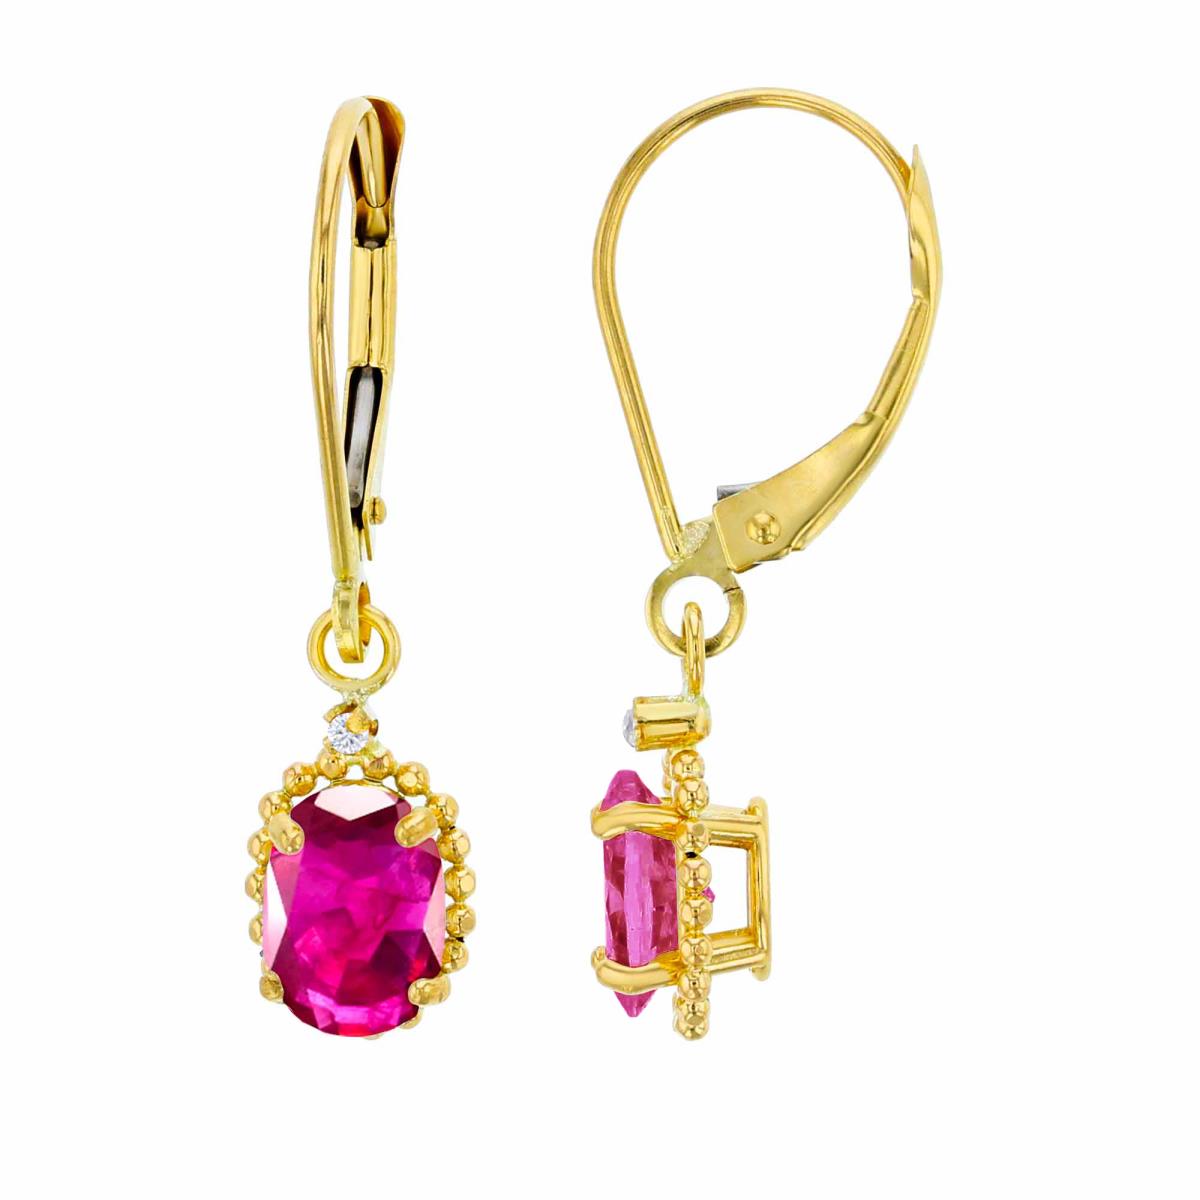 10K Yellow Gold 1.25mm Rd White Topaz & 6x4mm Ov Created Ruby Bead Frame Drop Lever-Back Earring